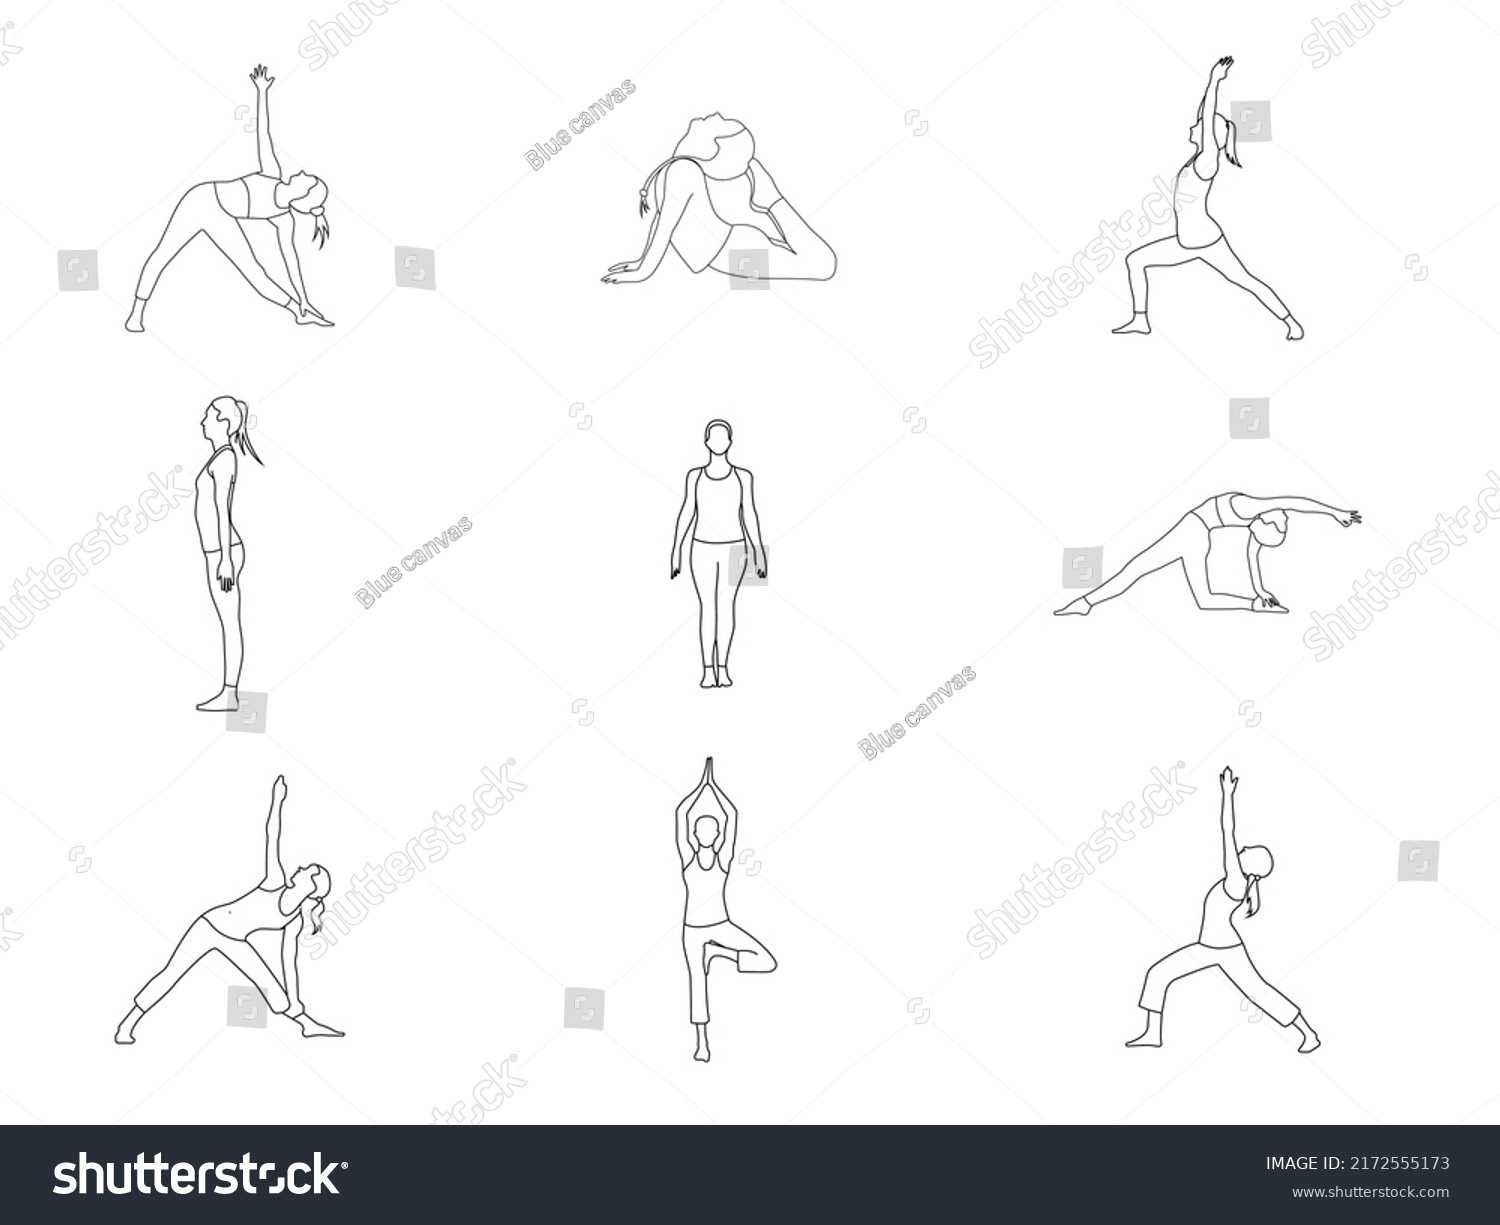 SVG of 
Yoga poses line art Images, Stock Photos, and Vectors exercises Line drawing  Images, Stock Photos, and Vectors, exercises Poses Line Drawing Vector Images, health, Yoga Vector SVG Icon, SVG vector
 svg